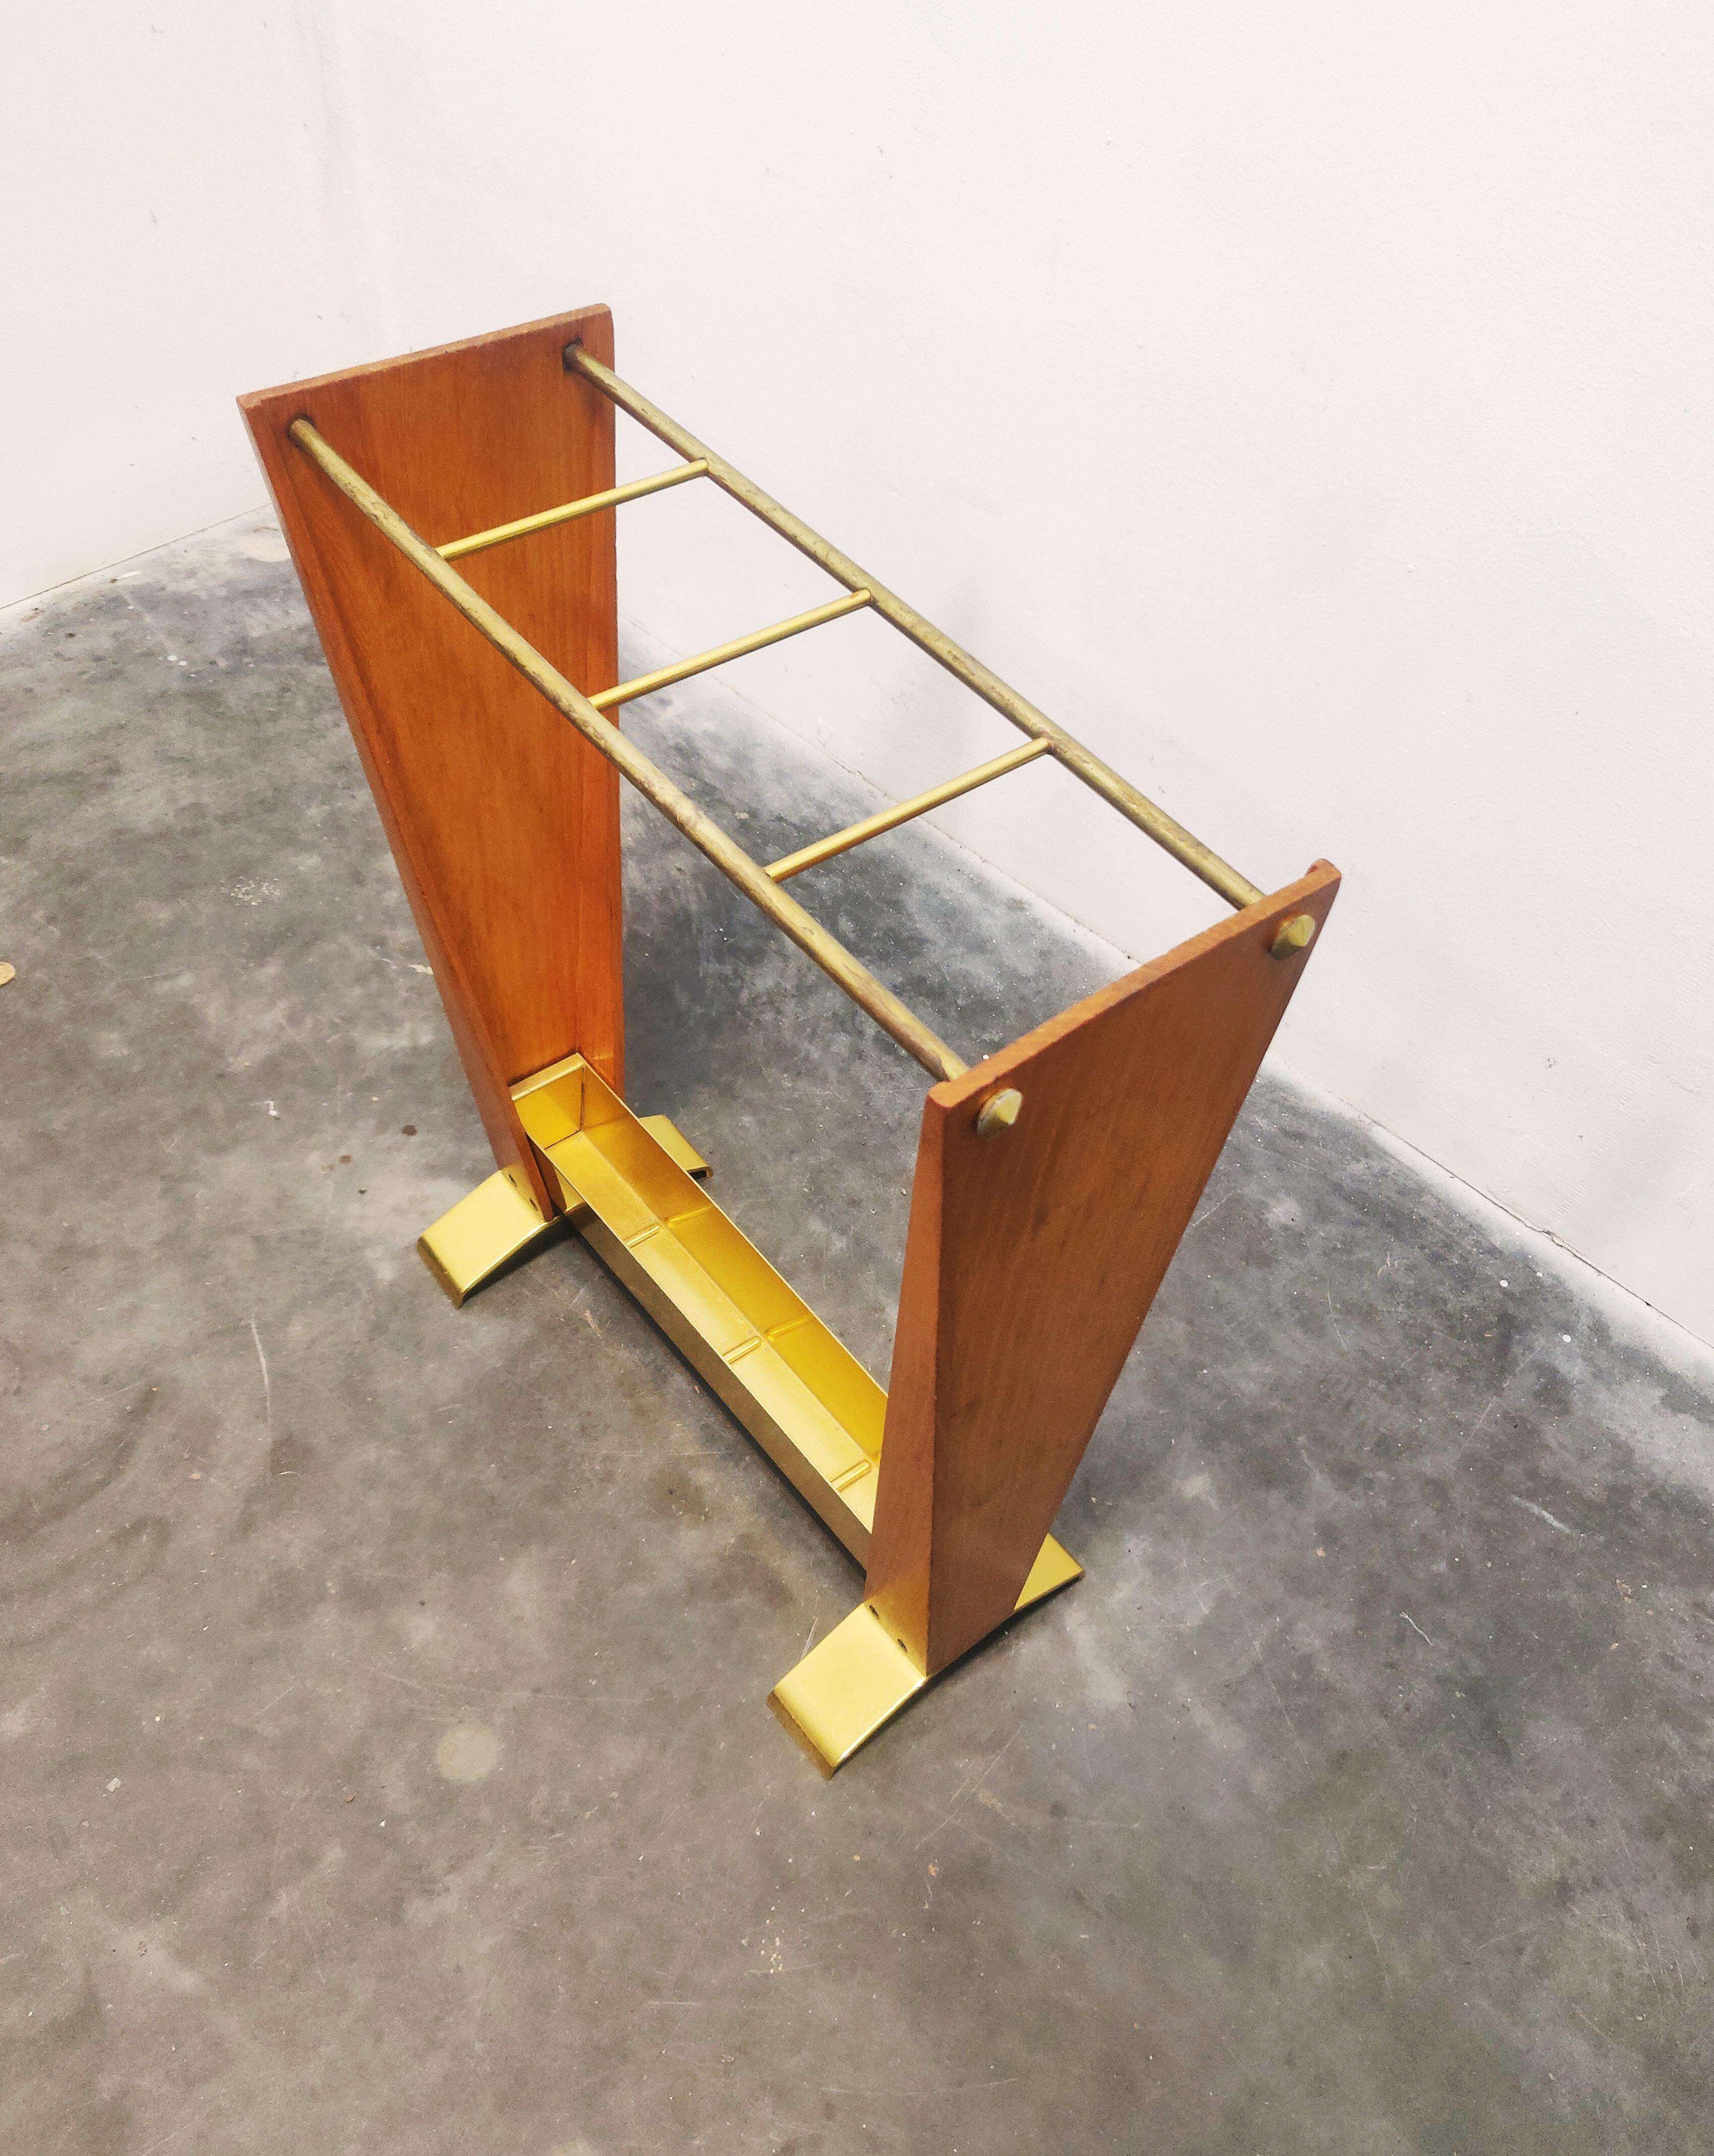 Mid Century Modern umbrella stand, 1960s. wood and gold aluminum stand. rare model with a special appearance.